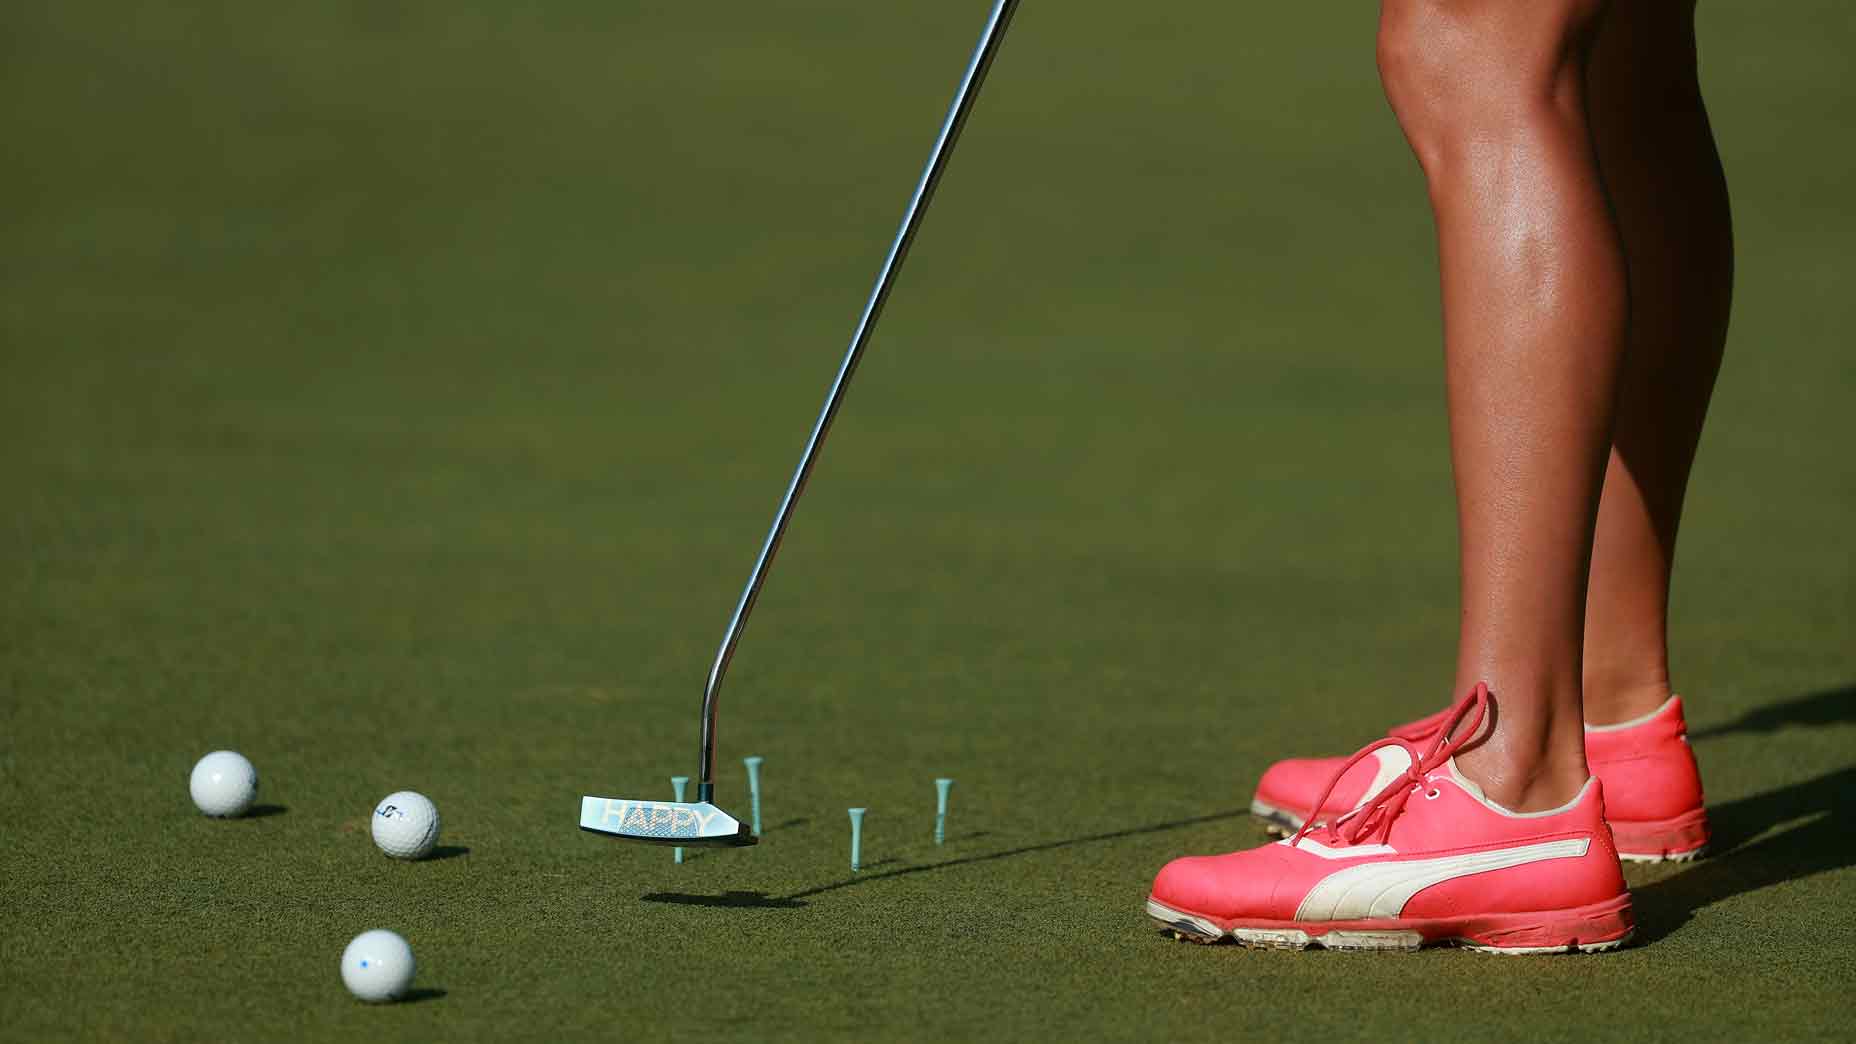 GOLF Top 100 Teacher Kellie Stenzel shares her favorite putting drills, which can help build confidence and lower your scores